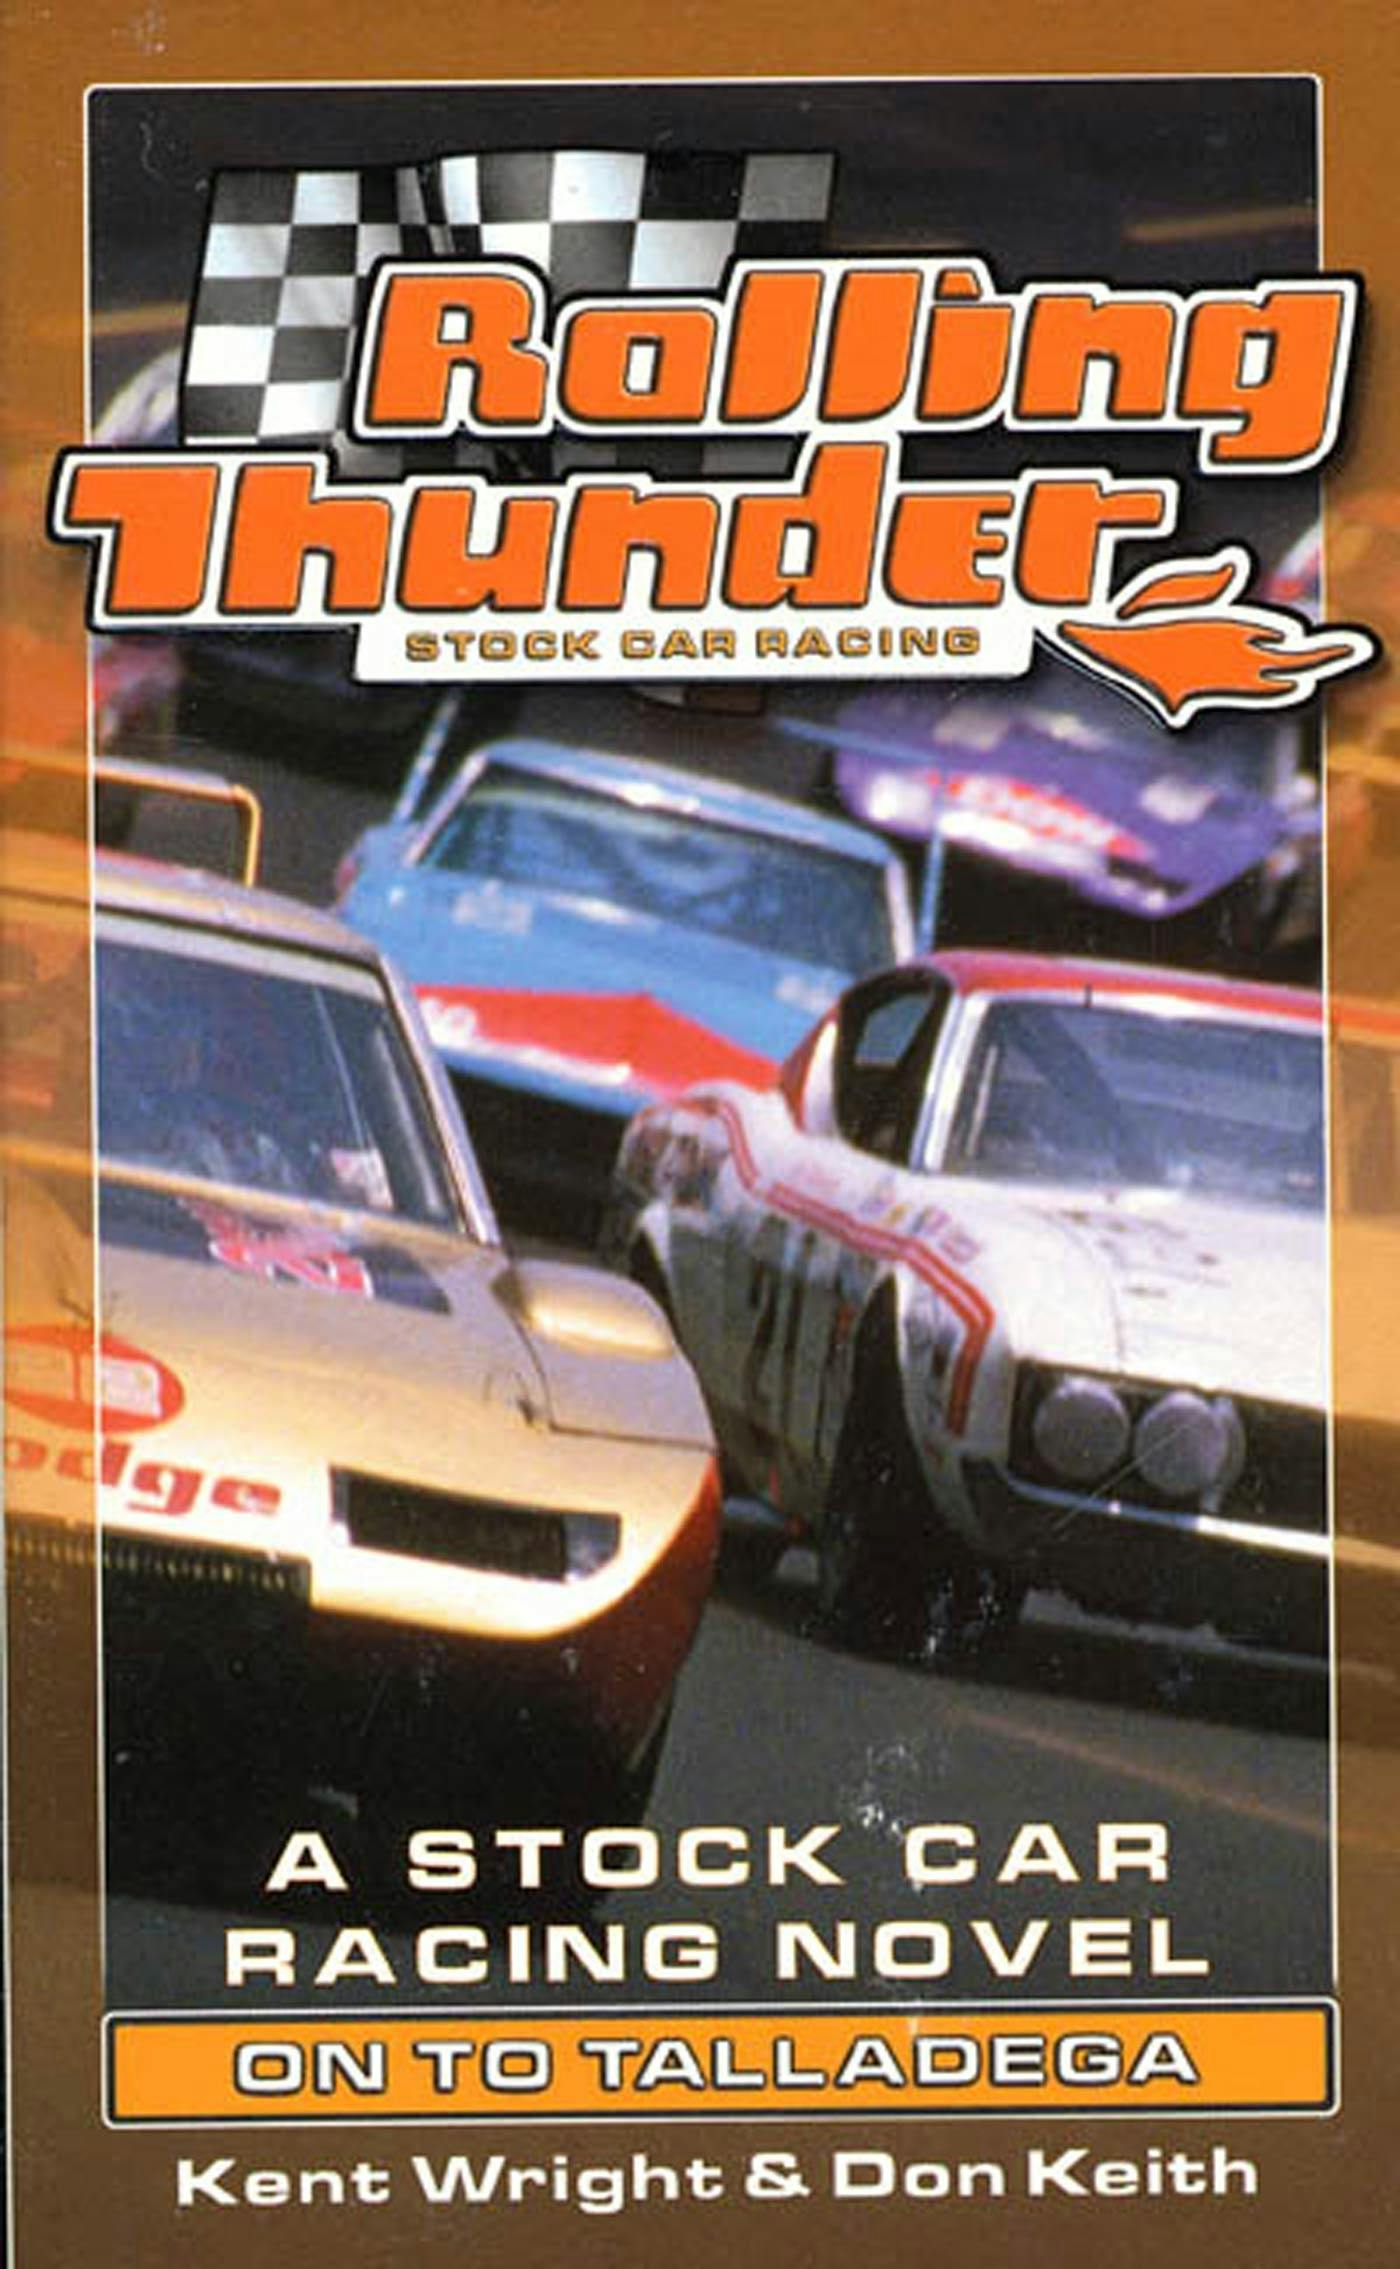 Cover for the book titled as: Rolling Thunder Stock Car Racing: On To Talladega